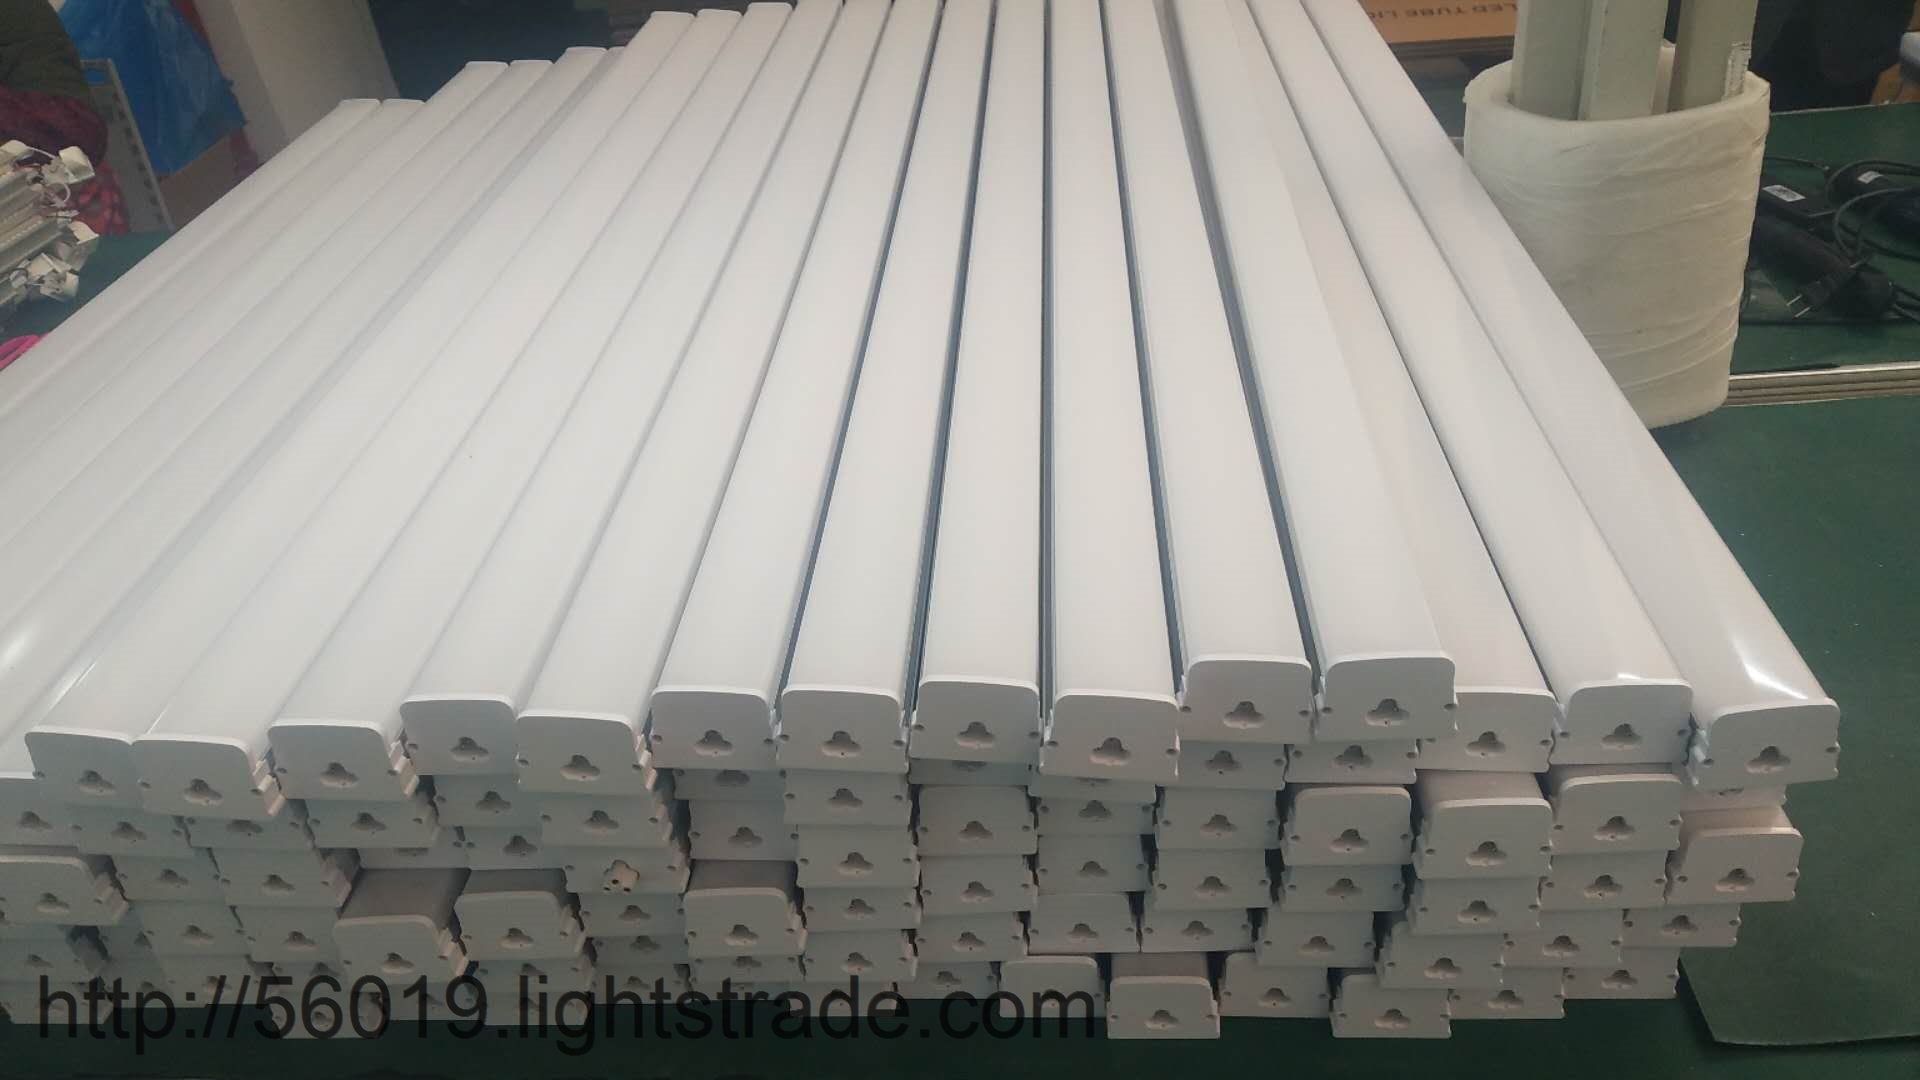 OEM LED light T15 for official usage in high CR